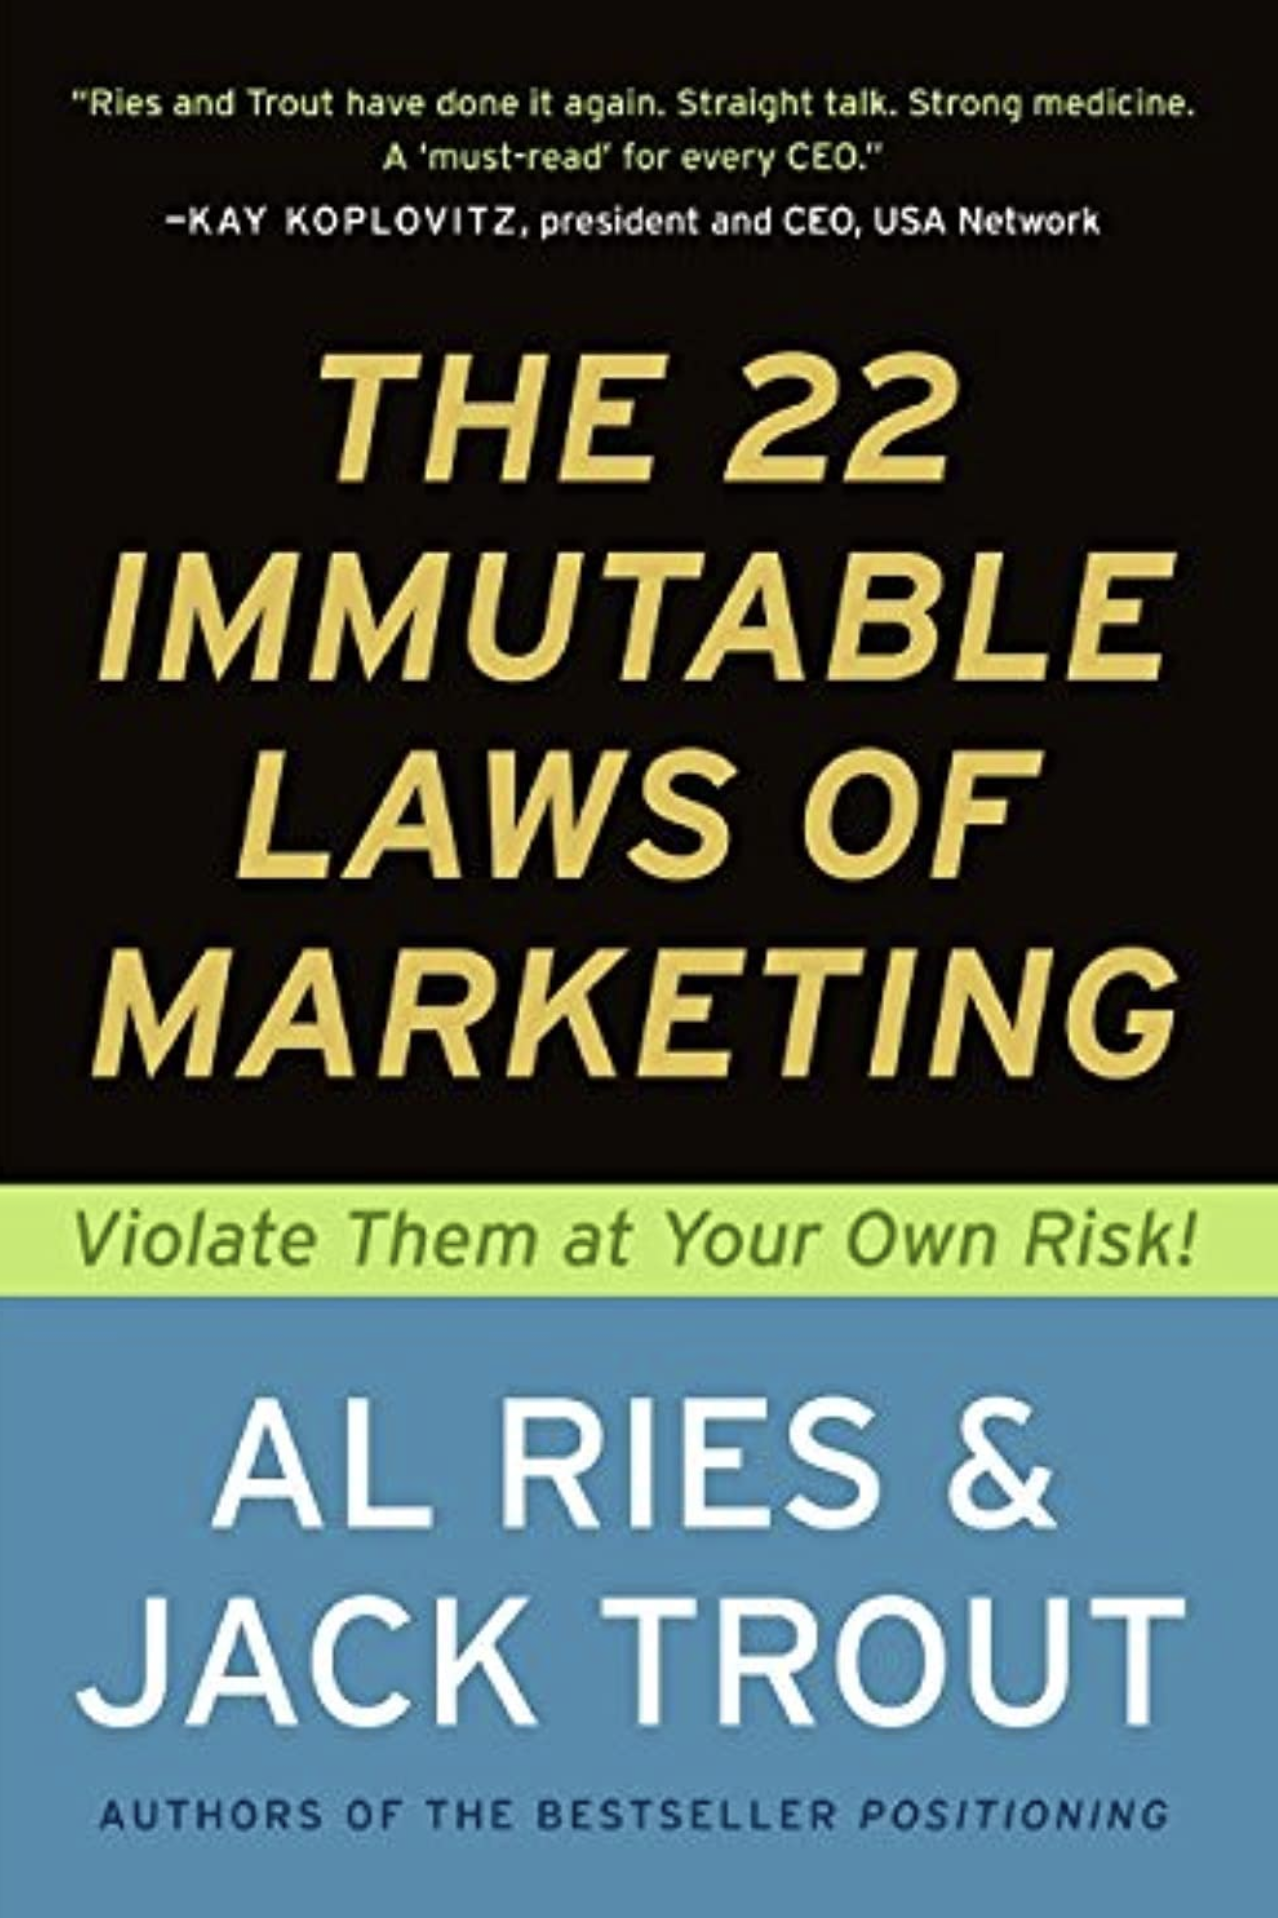 The 22 Immutable Laws of Marketing Violate Them at Your Own Risk! by Al Ries and Jack Trout